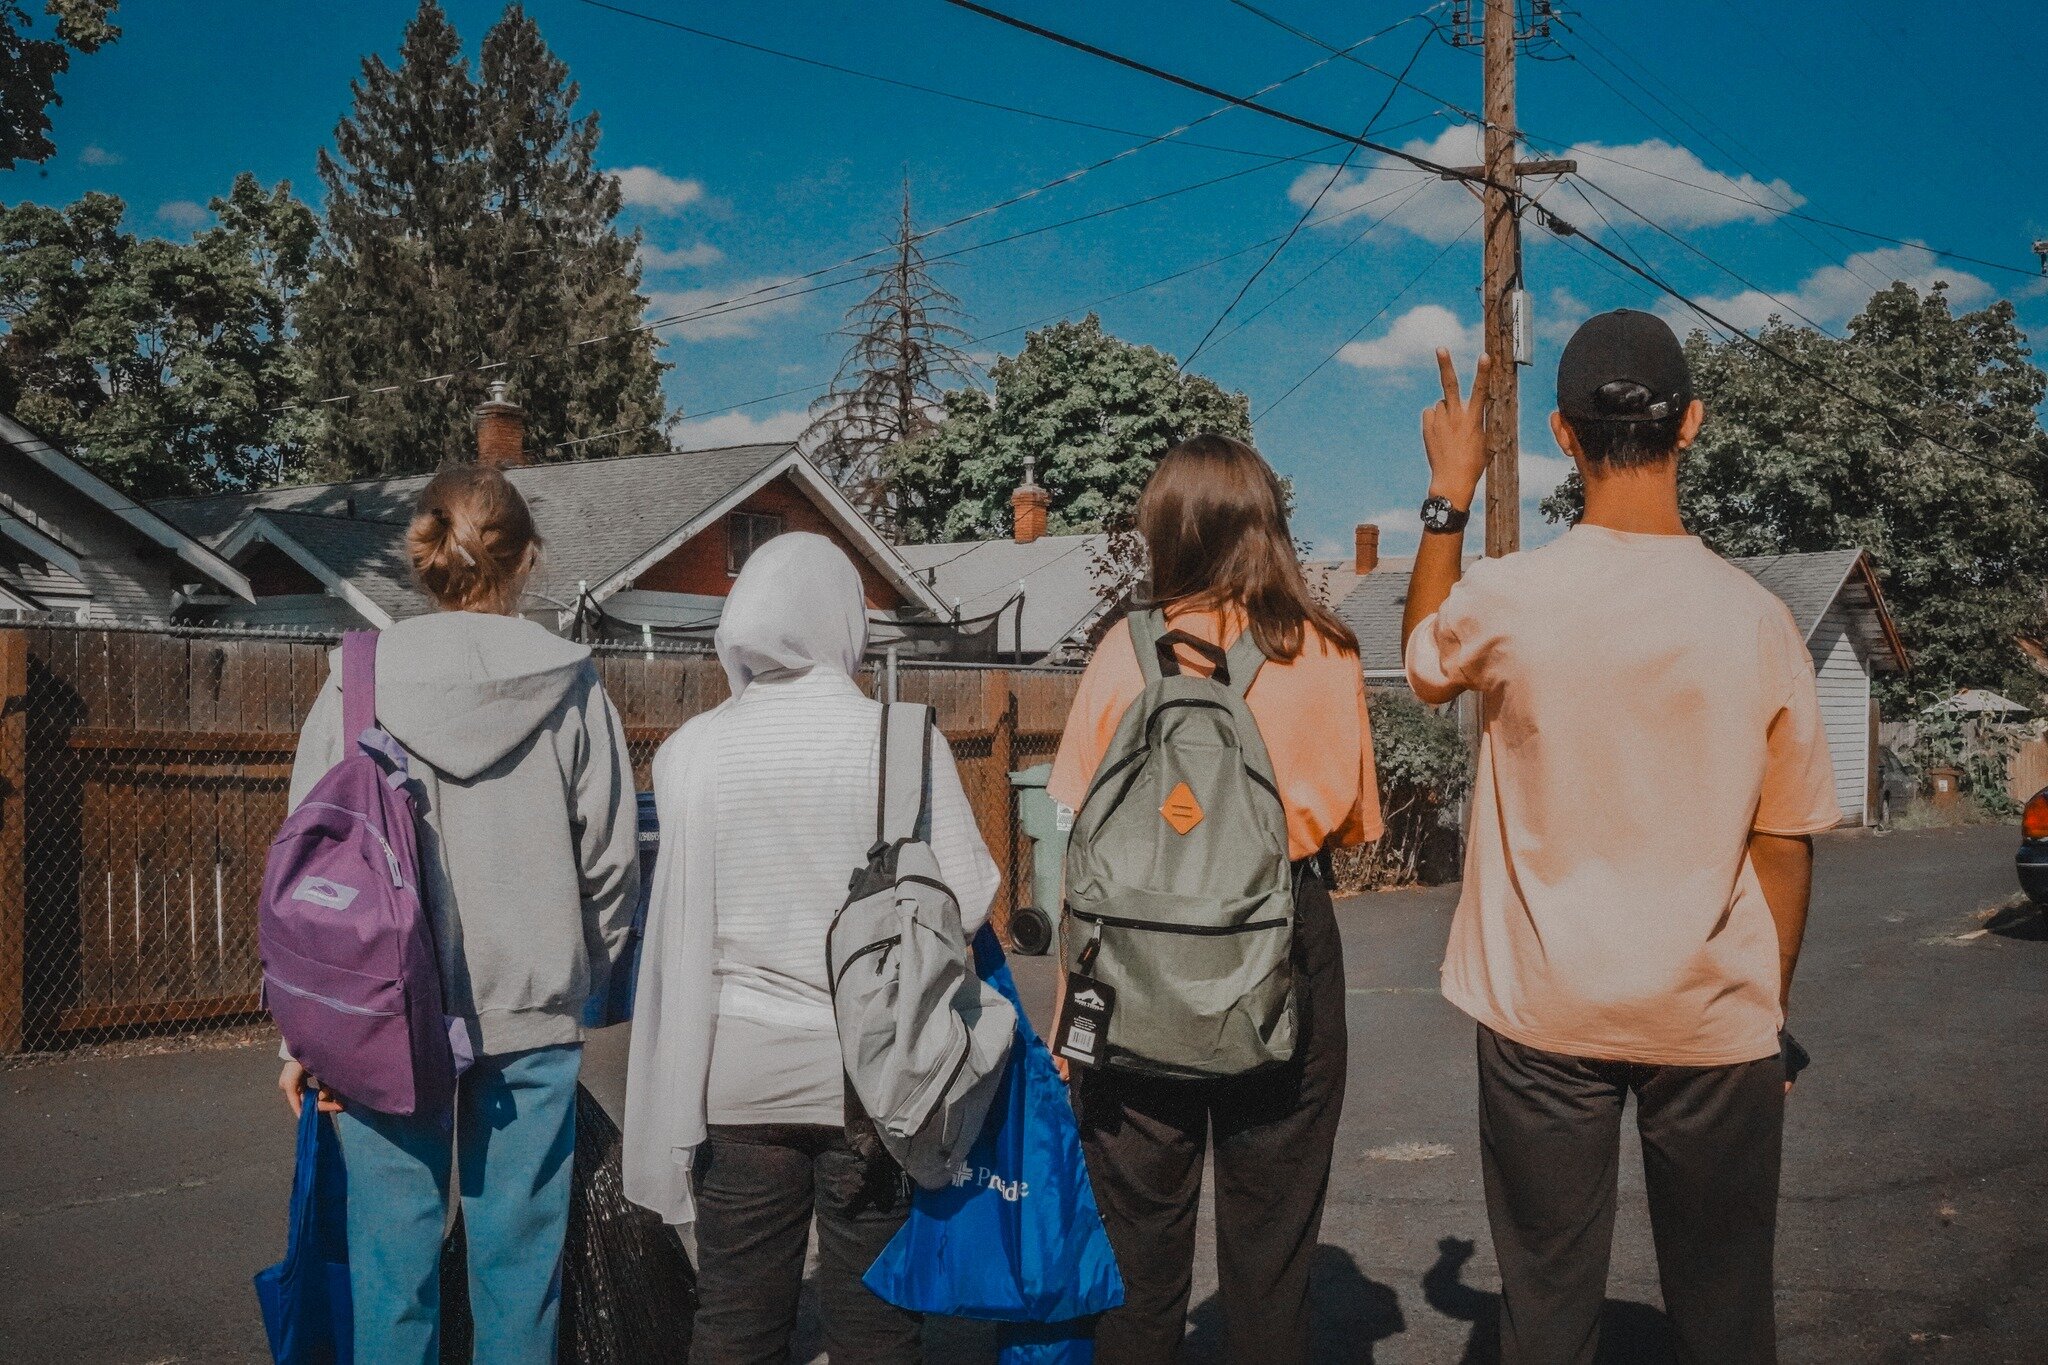 What an incredible day at our Back-to-School Block Party! 🌟🎒 In just the first 30 minutes, we distributed 300 backpacks filled with school supplies and about 200 articles of clothing to refugees and immigrant families in Spokane! The overwhelming t